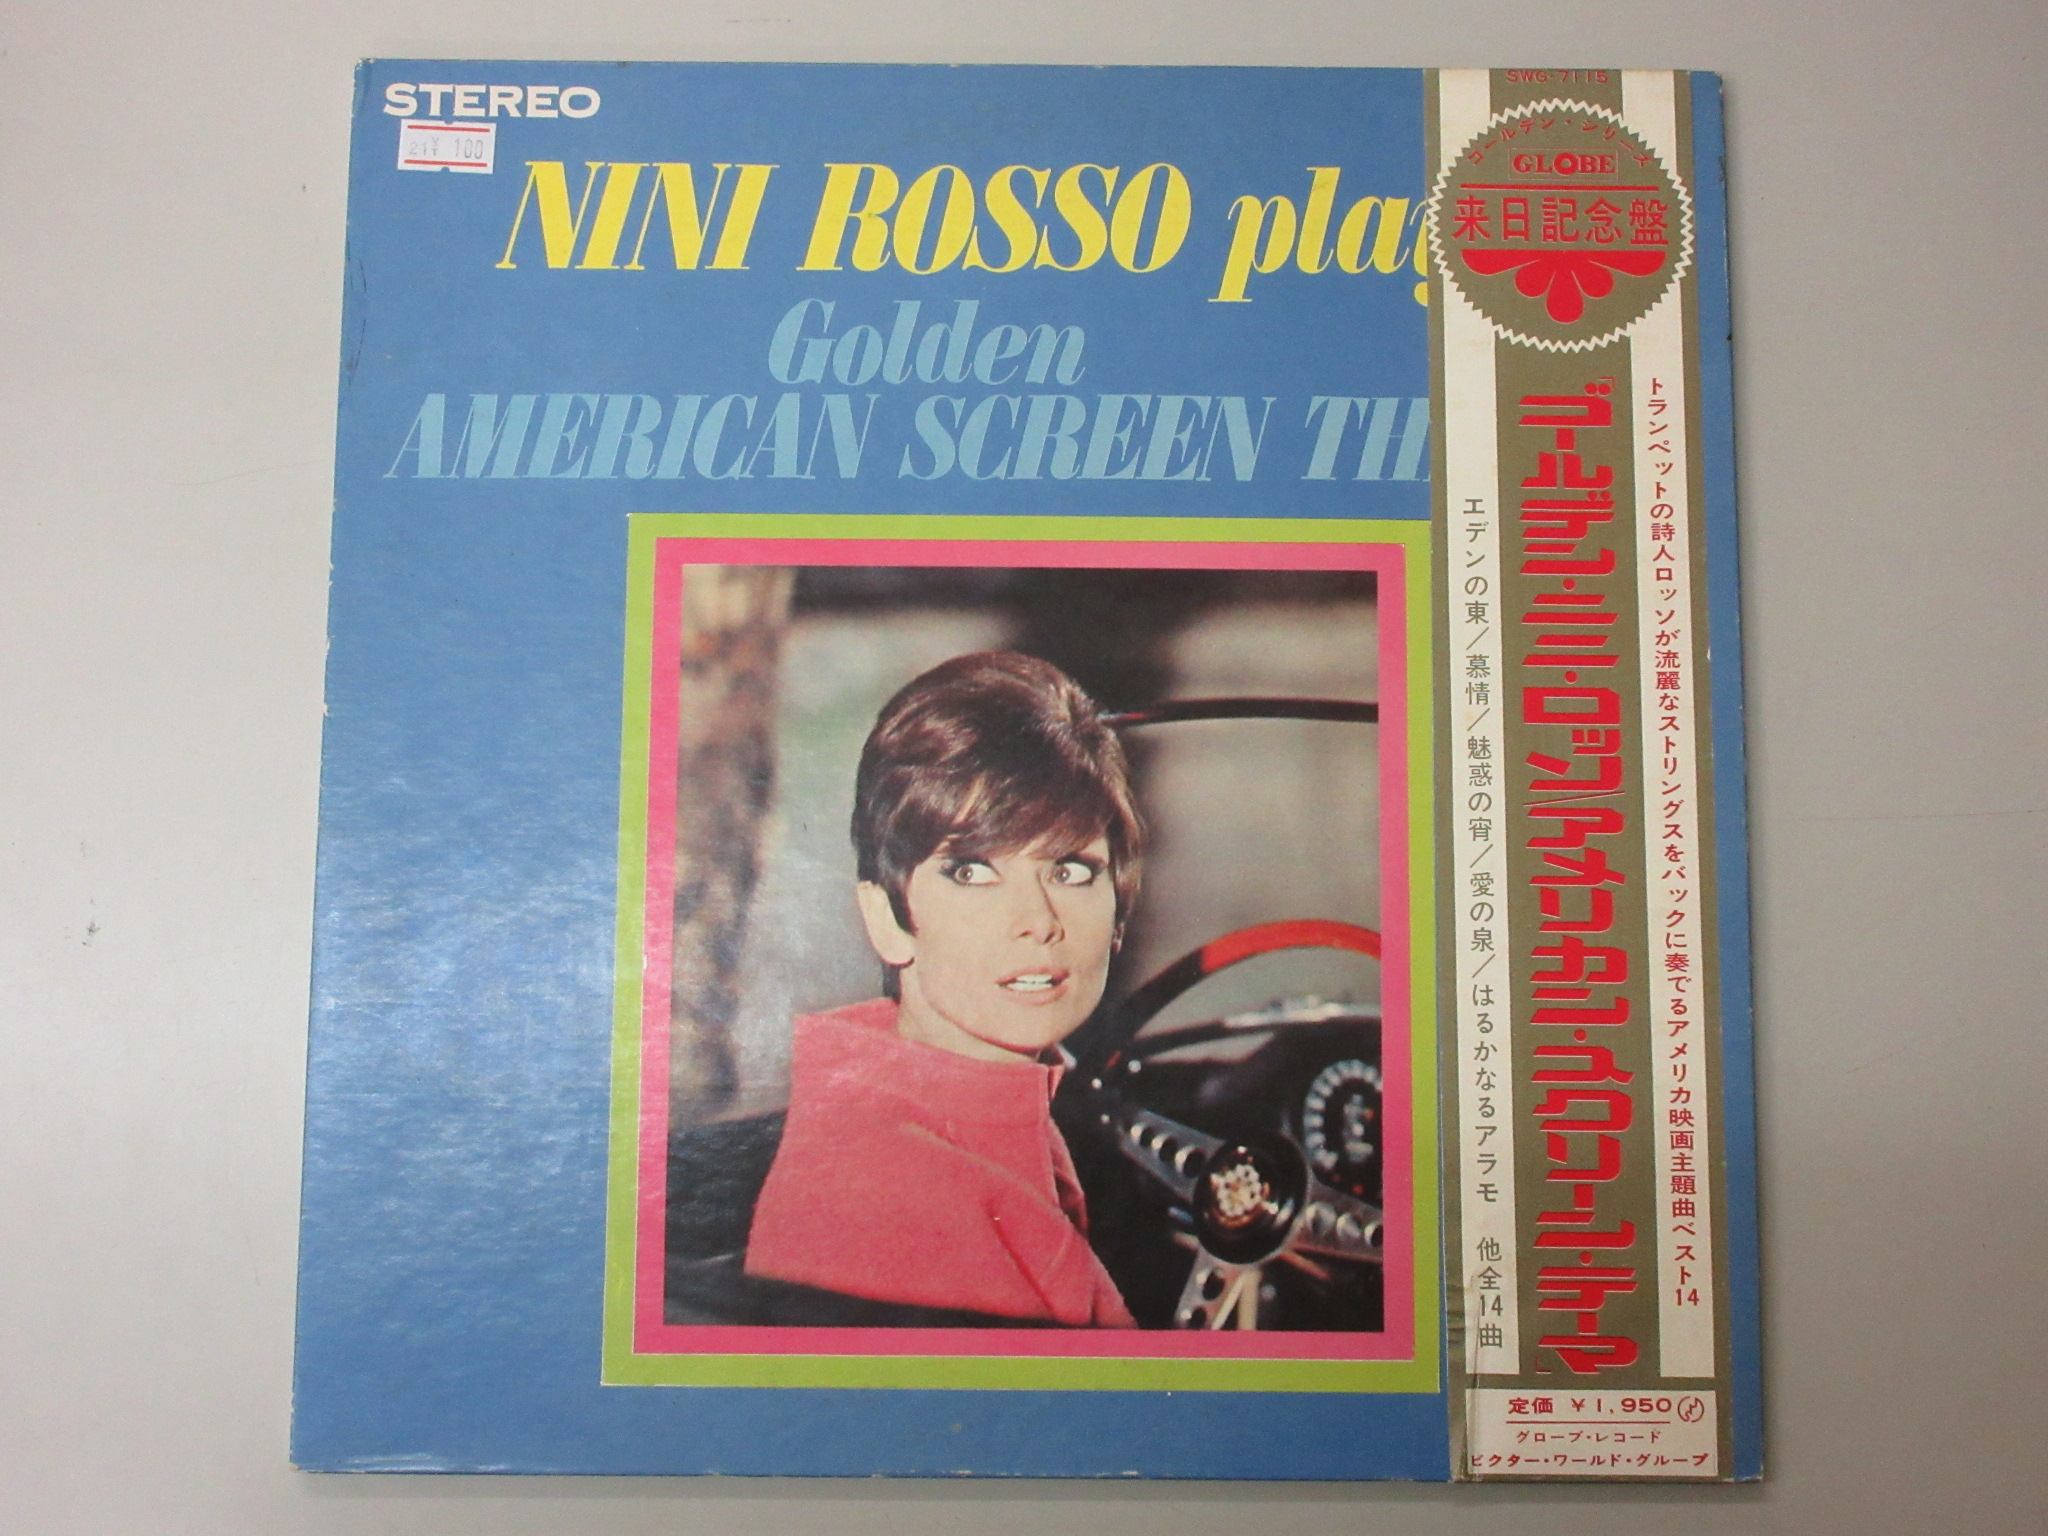 Nini Rosso  Nini Rosso Plays Golden American Screen Themes [SWG-7115]